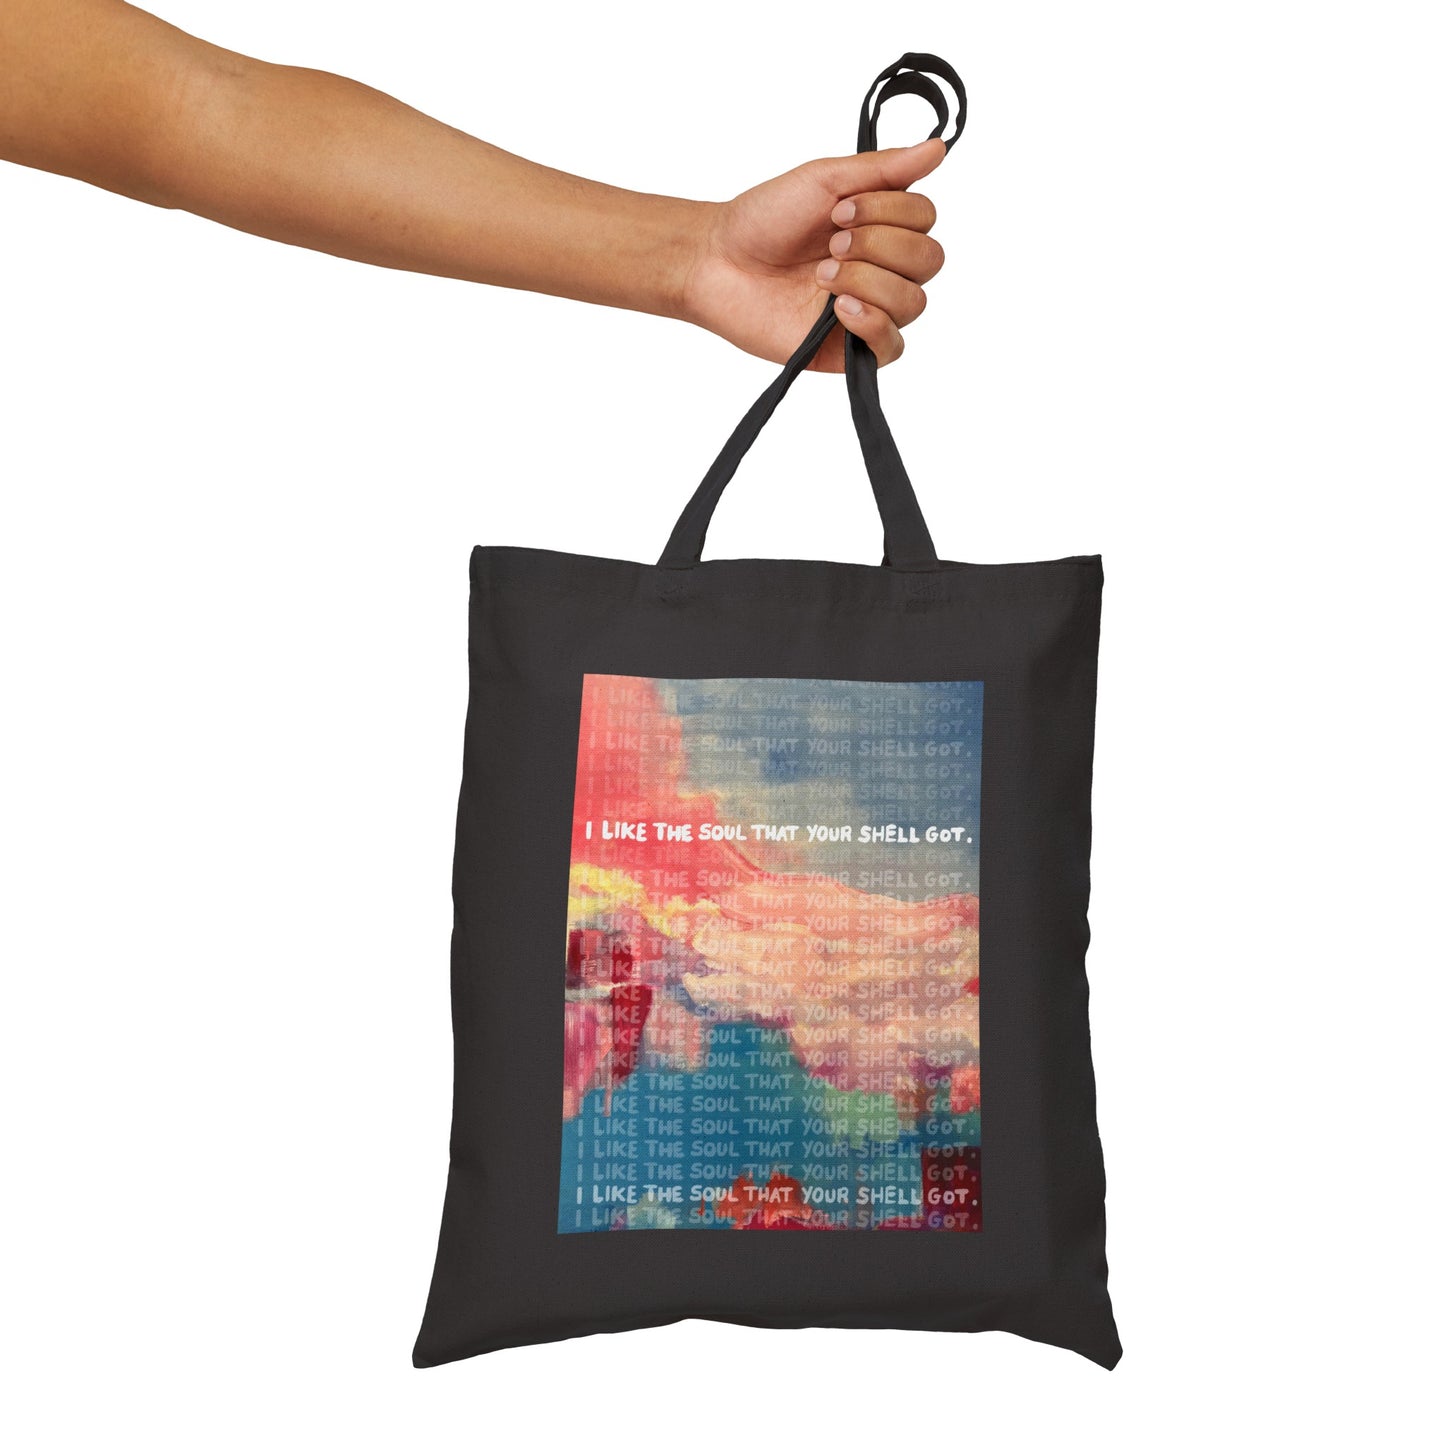 I Like The Soul That Your Shell Got - Tote Bag